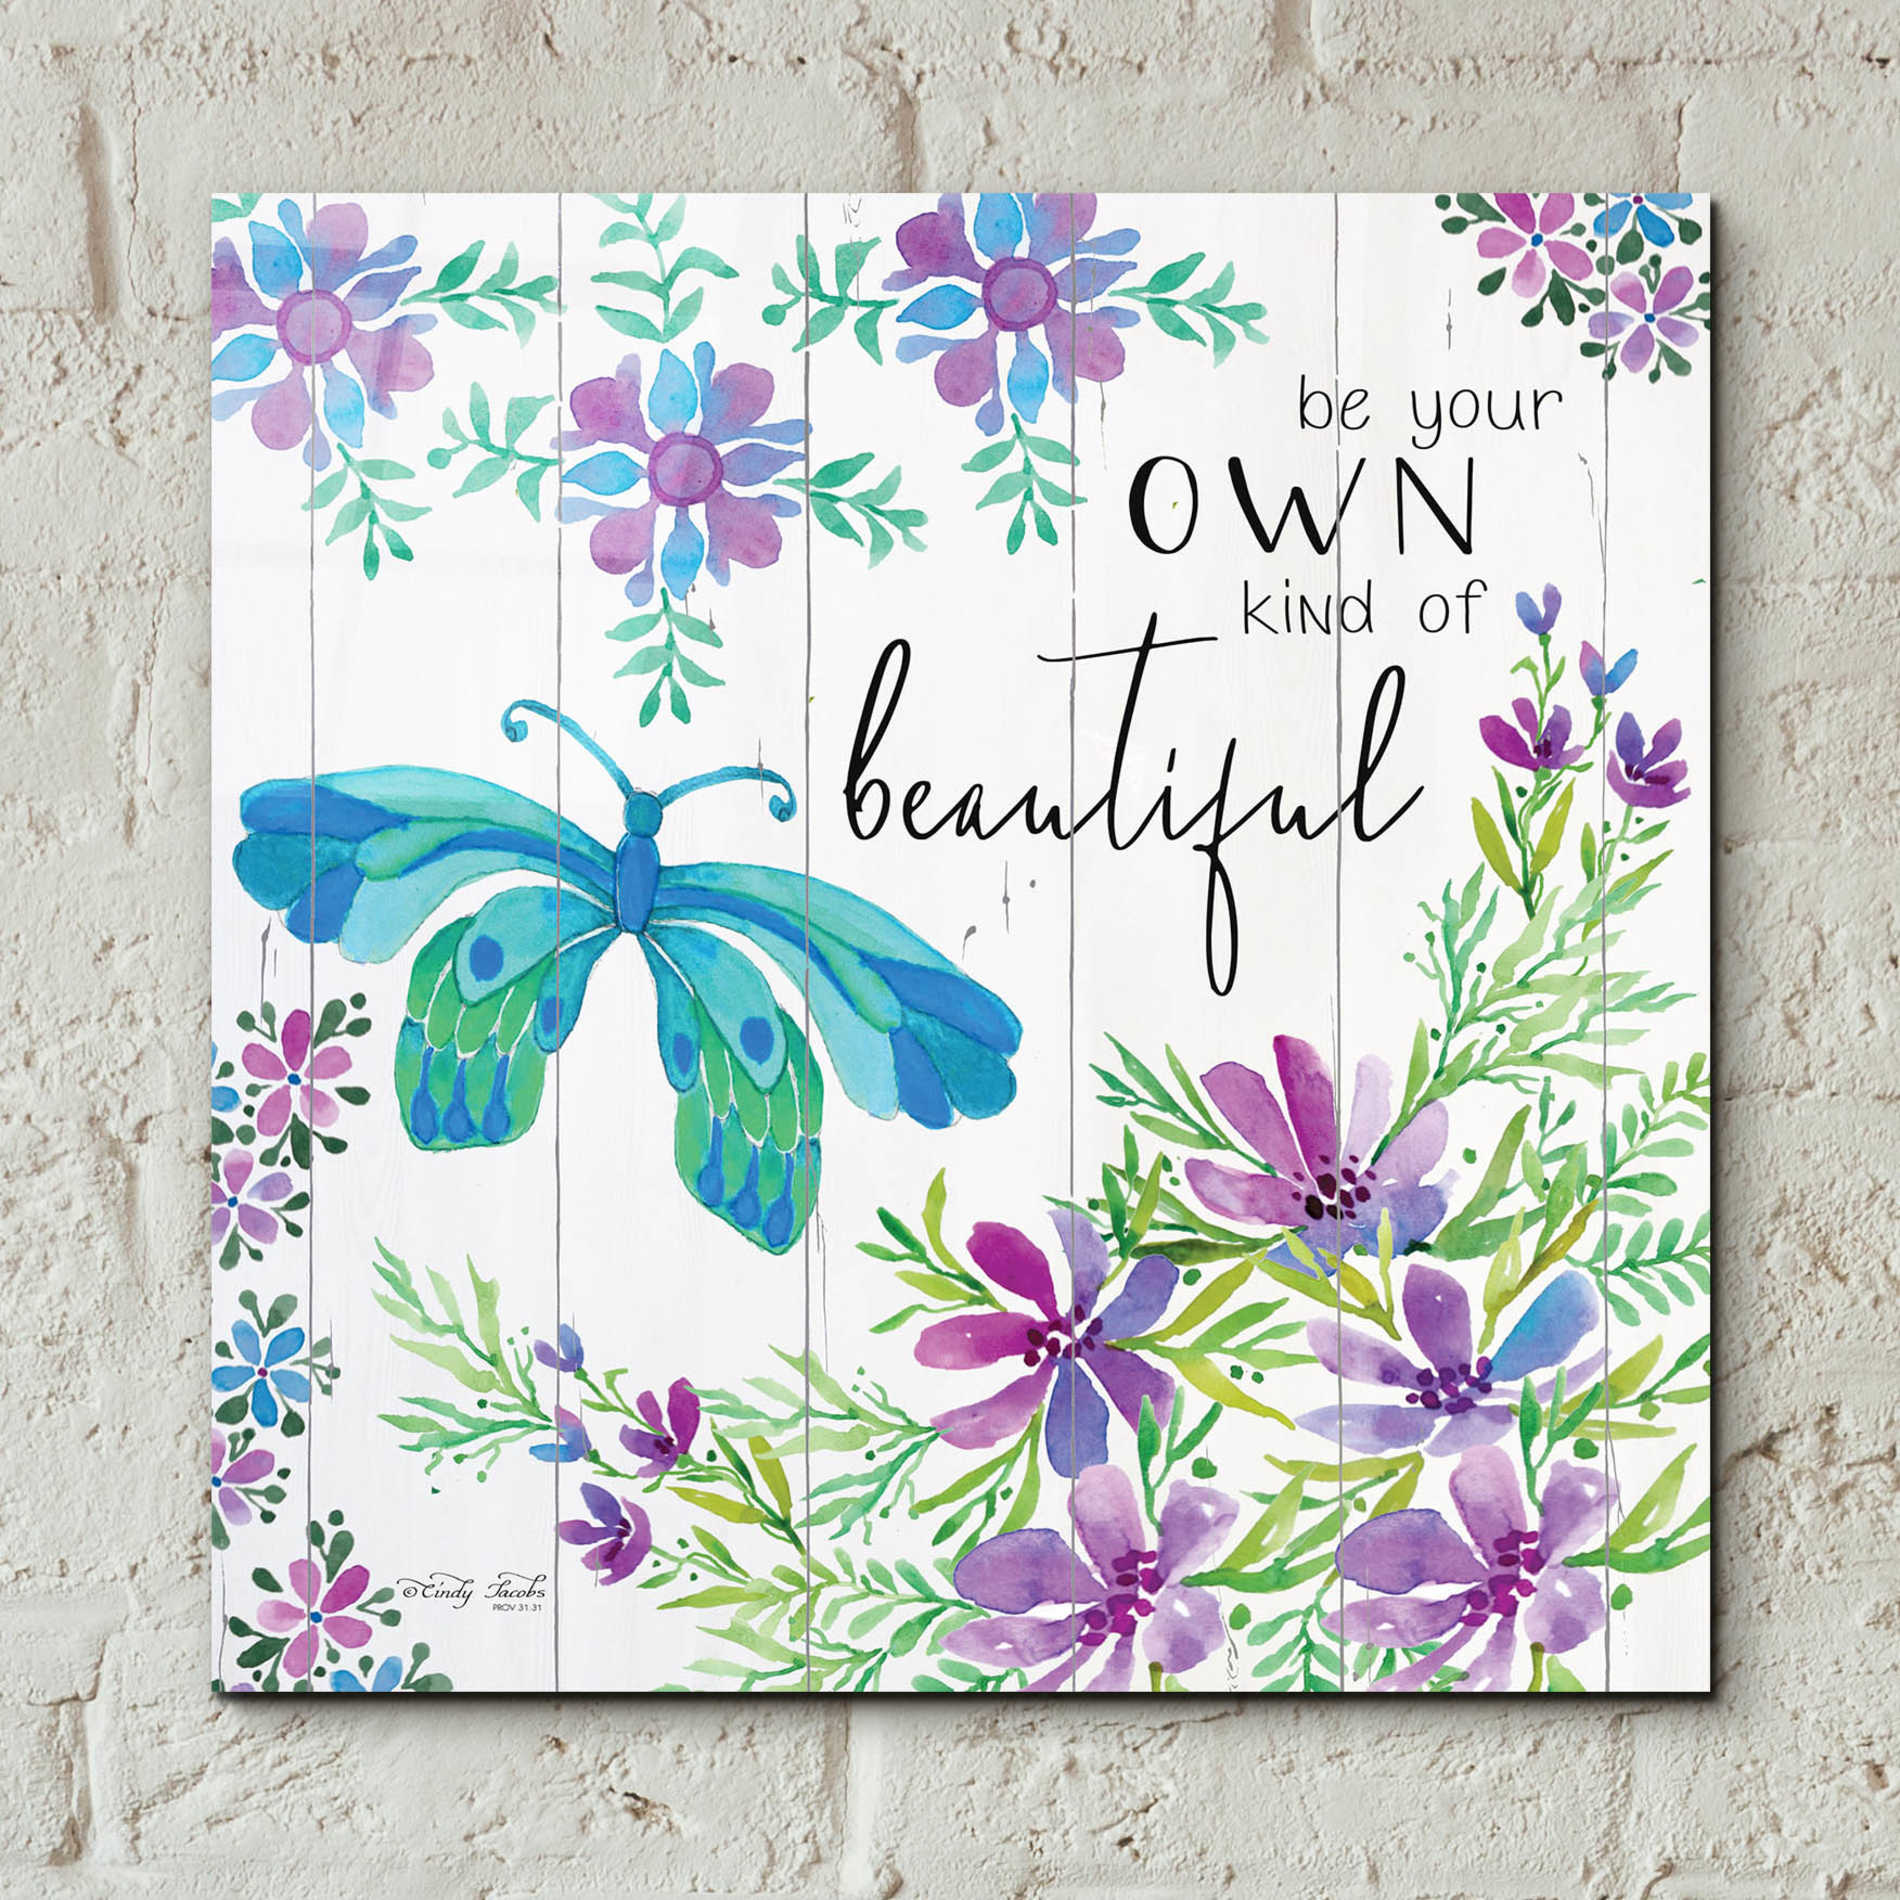 Epic Art 'Be Your Own Kind of Beautiful' by Cindy Jacobs, Acrylic Glass Wall Art,12x12